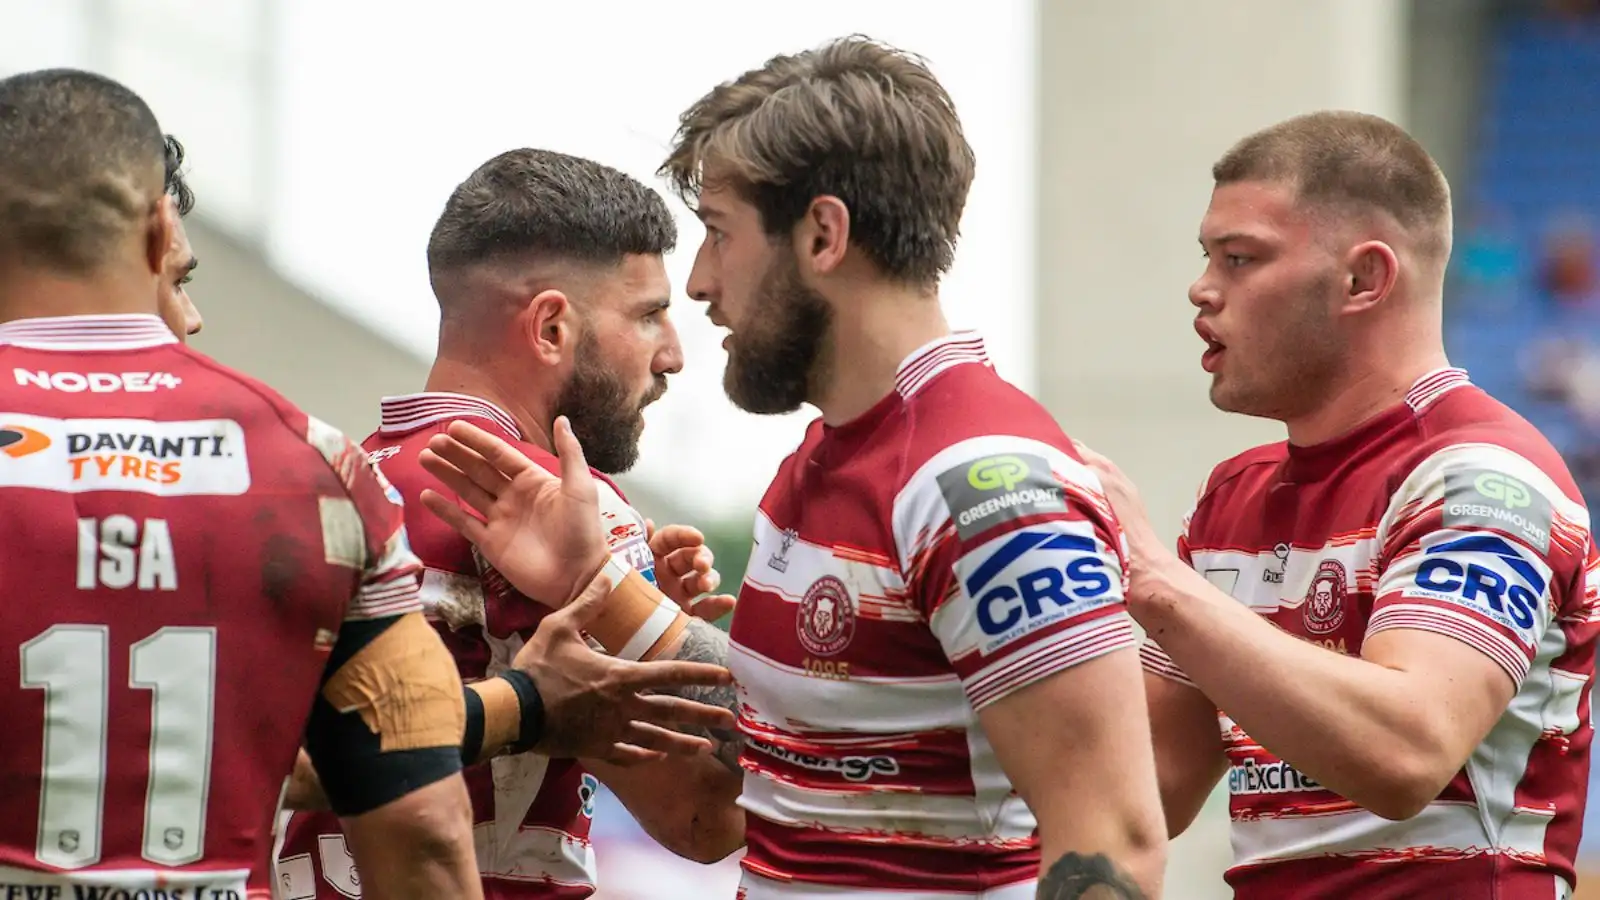 Wigan go top of Super League table with win over winless Wakefield